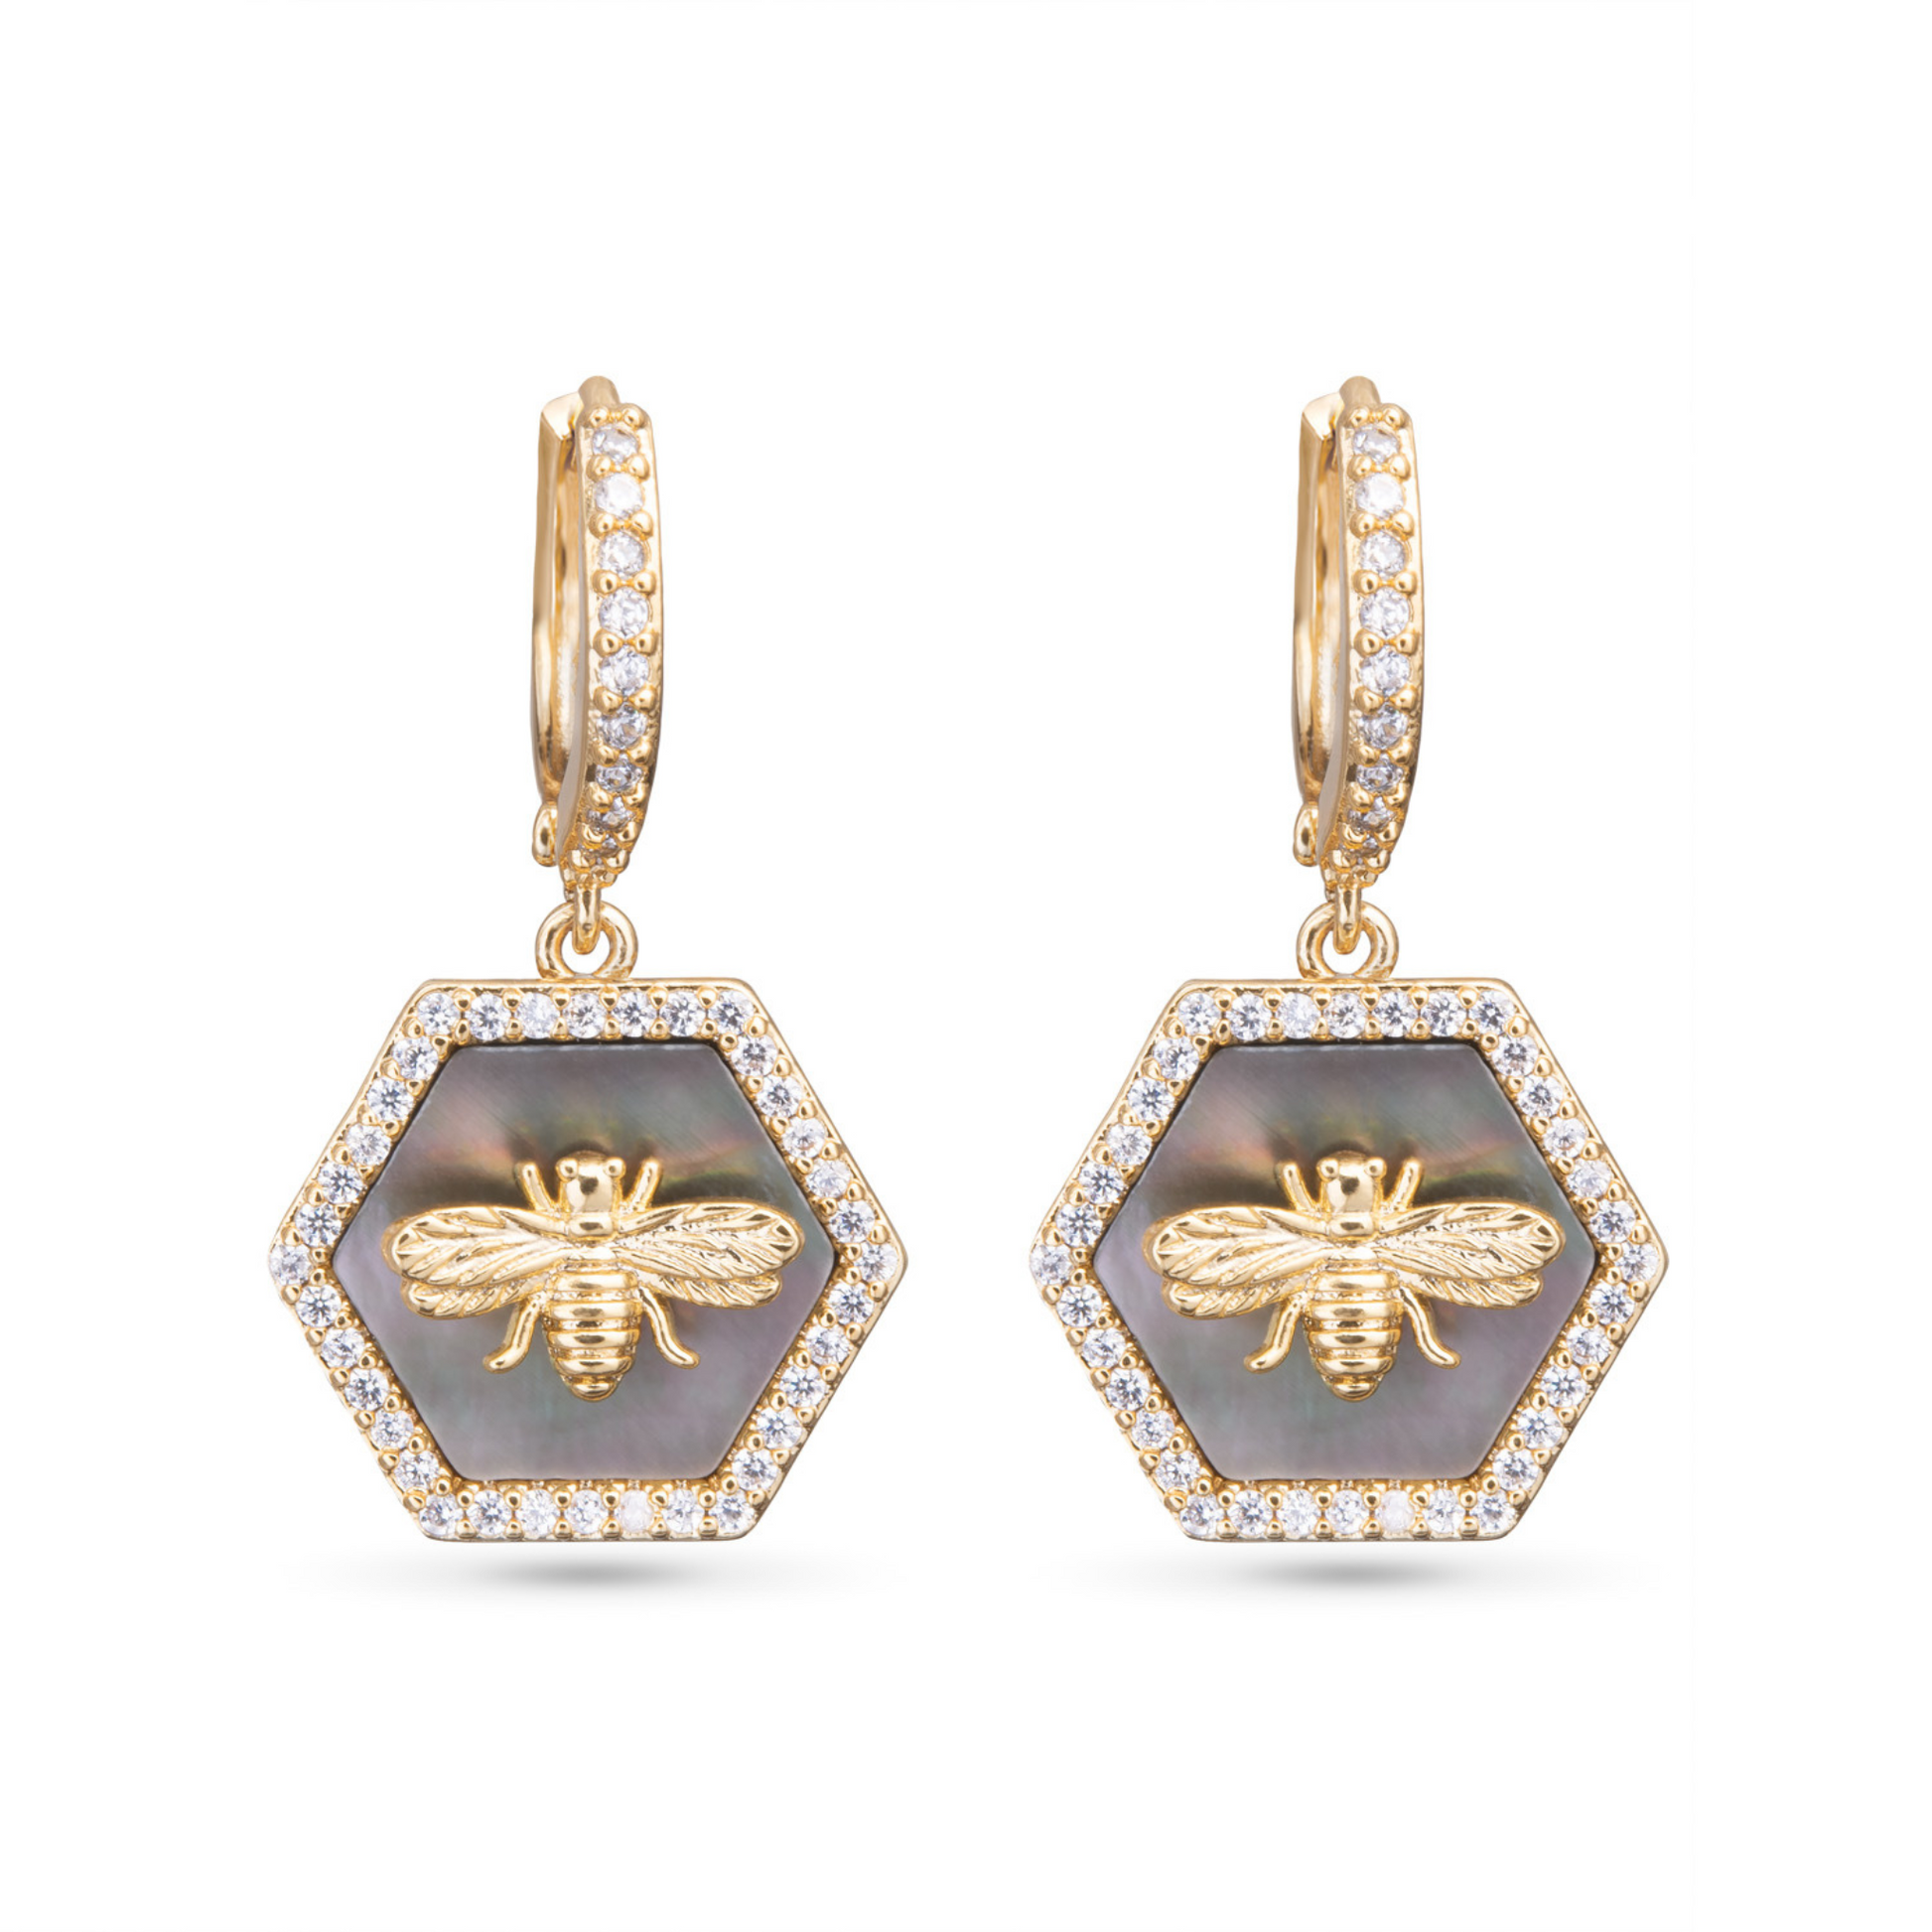 These Hexagon Bee Earrings are a stunning addition to any jewelry collection. Made with grey mother of pearl and sparkling rhinestone accents, these dangle earrings feature a beautiful bee design adorned with cubic zirconia. Elevate any outfit with these unique and elegant earrings.